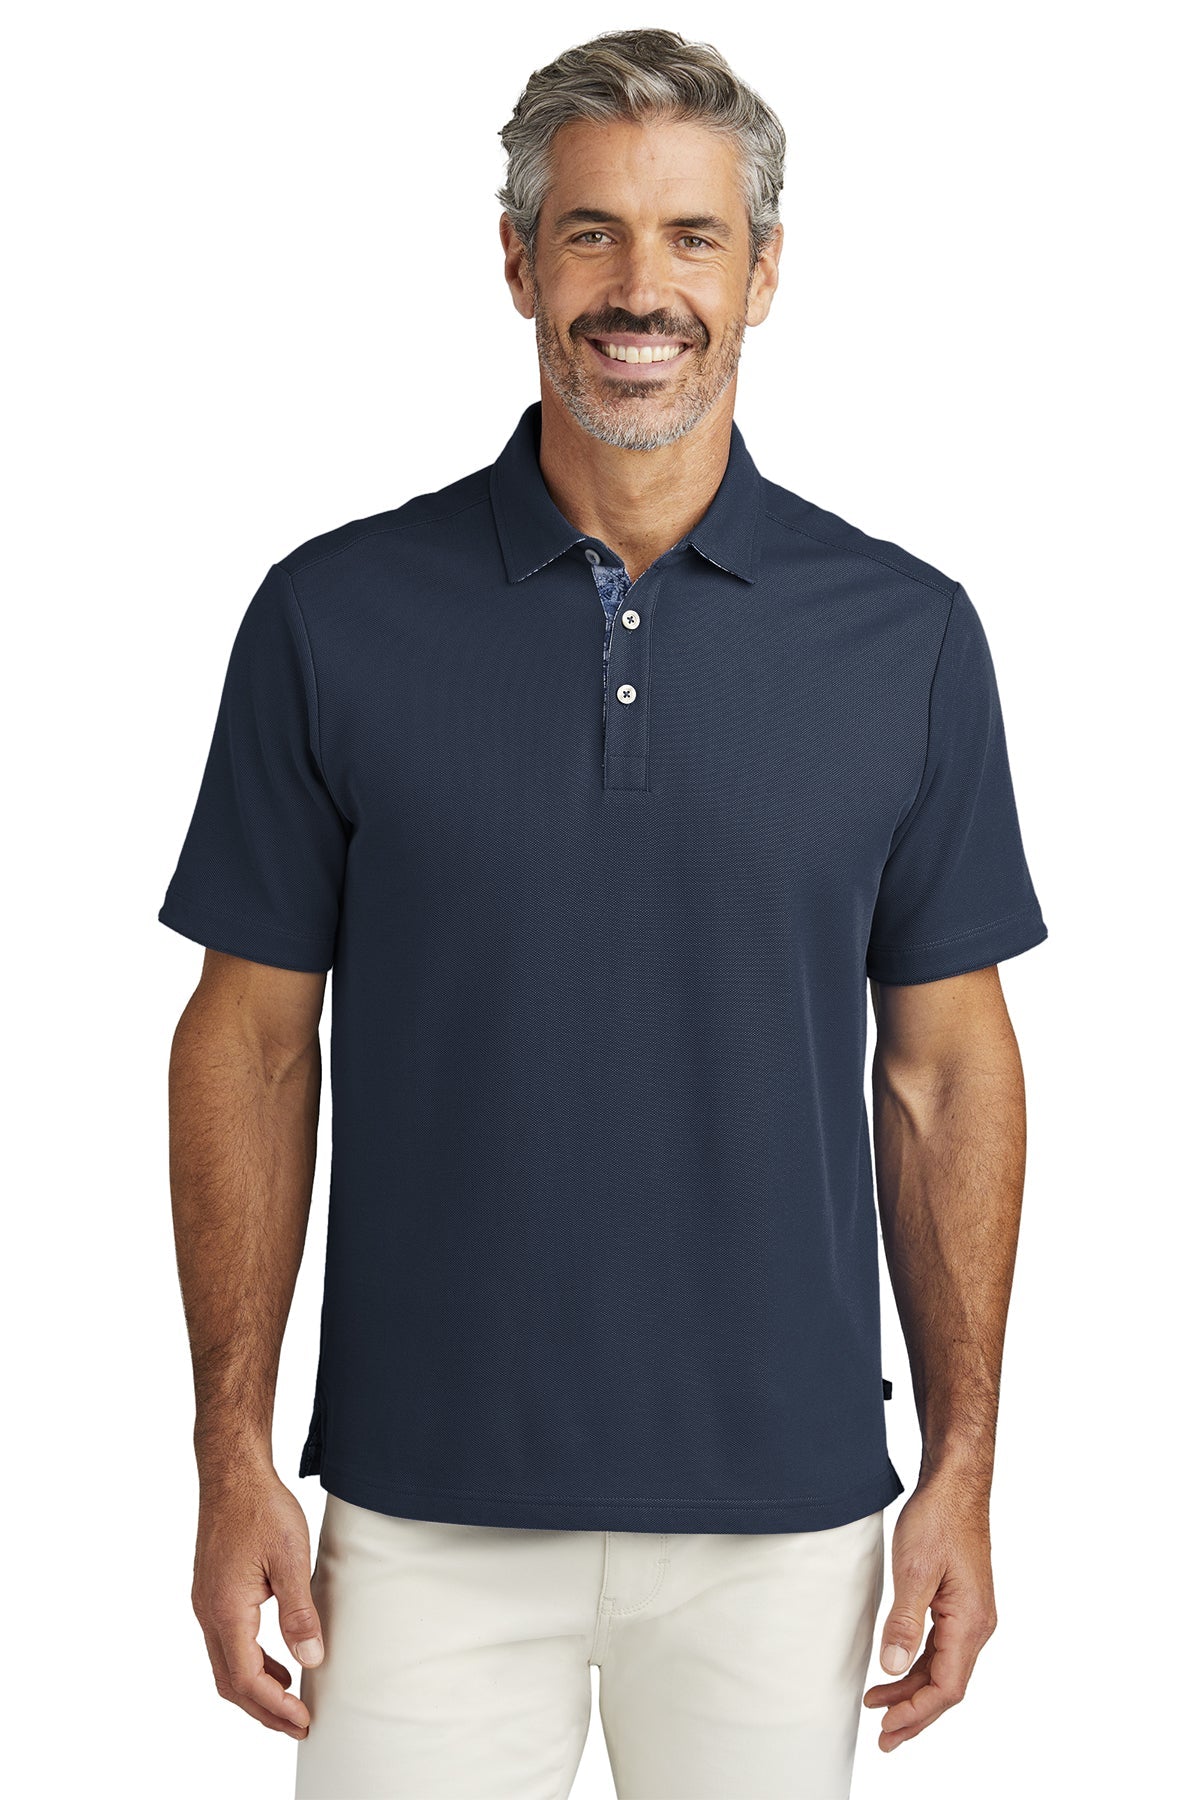 Tommy Bahama Blue Note T223508TB polo shirts with logos